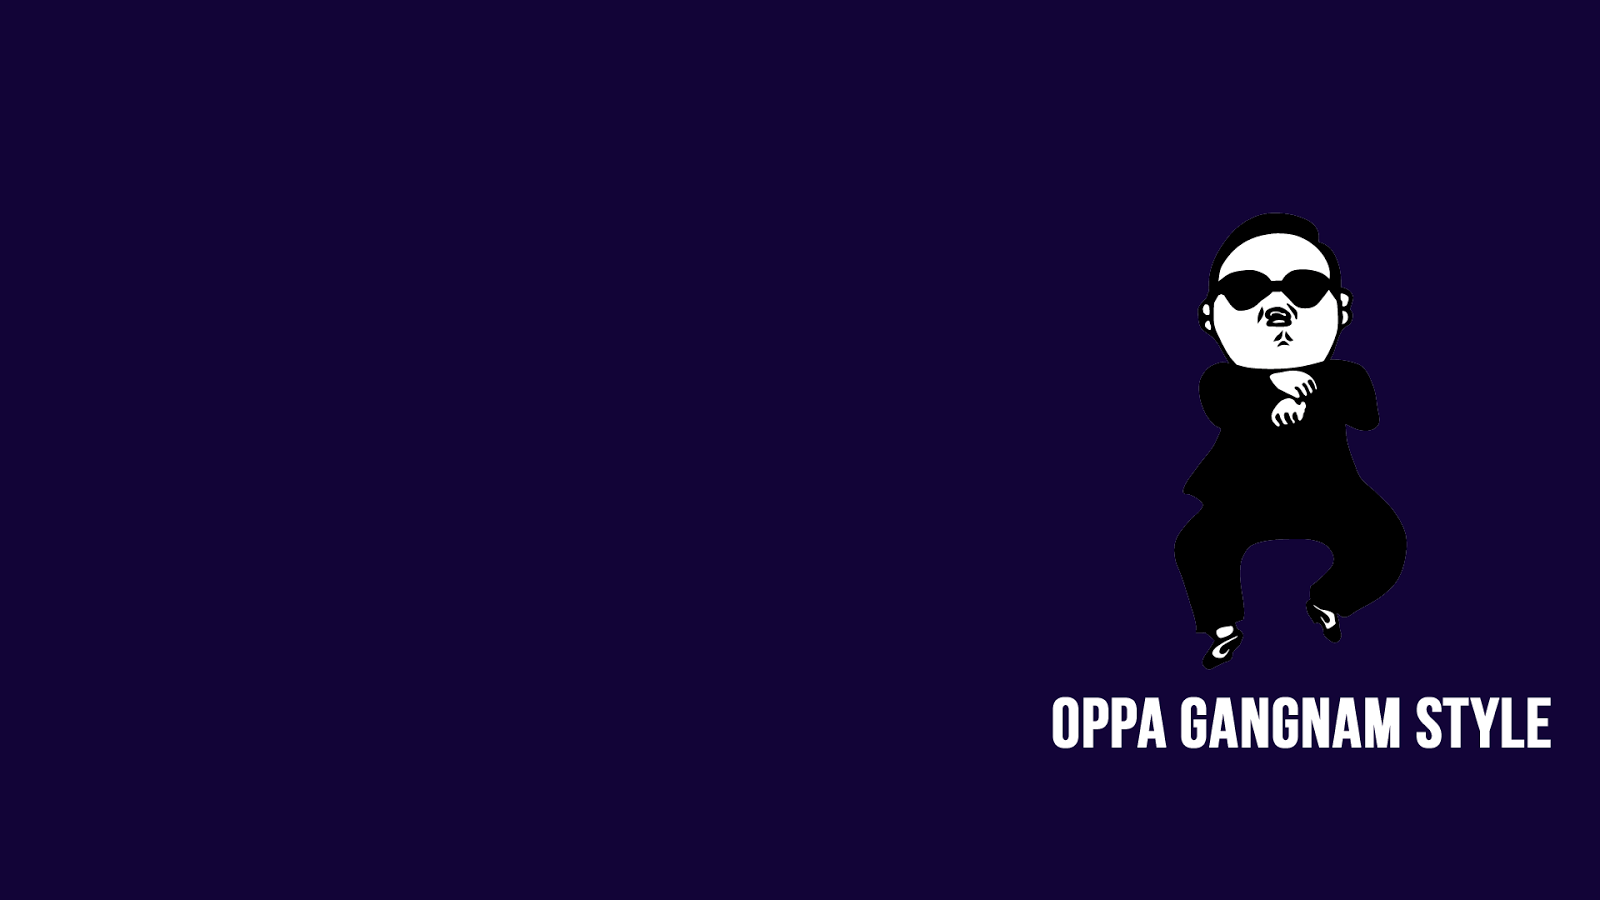 Free PSY Gangnam Style LV Wallpaper free APK Download For Android | GetJar